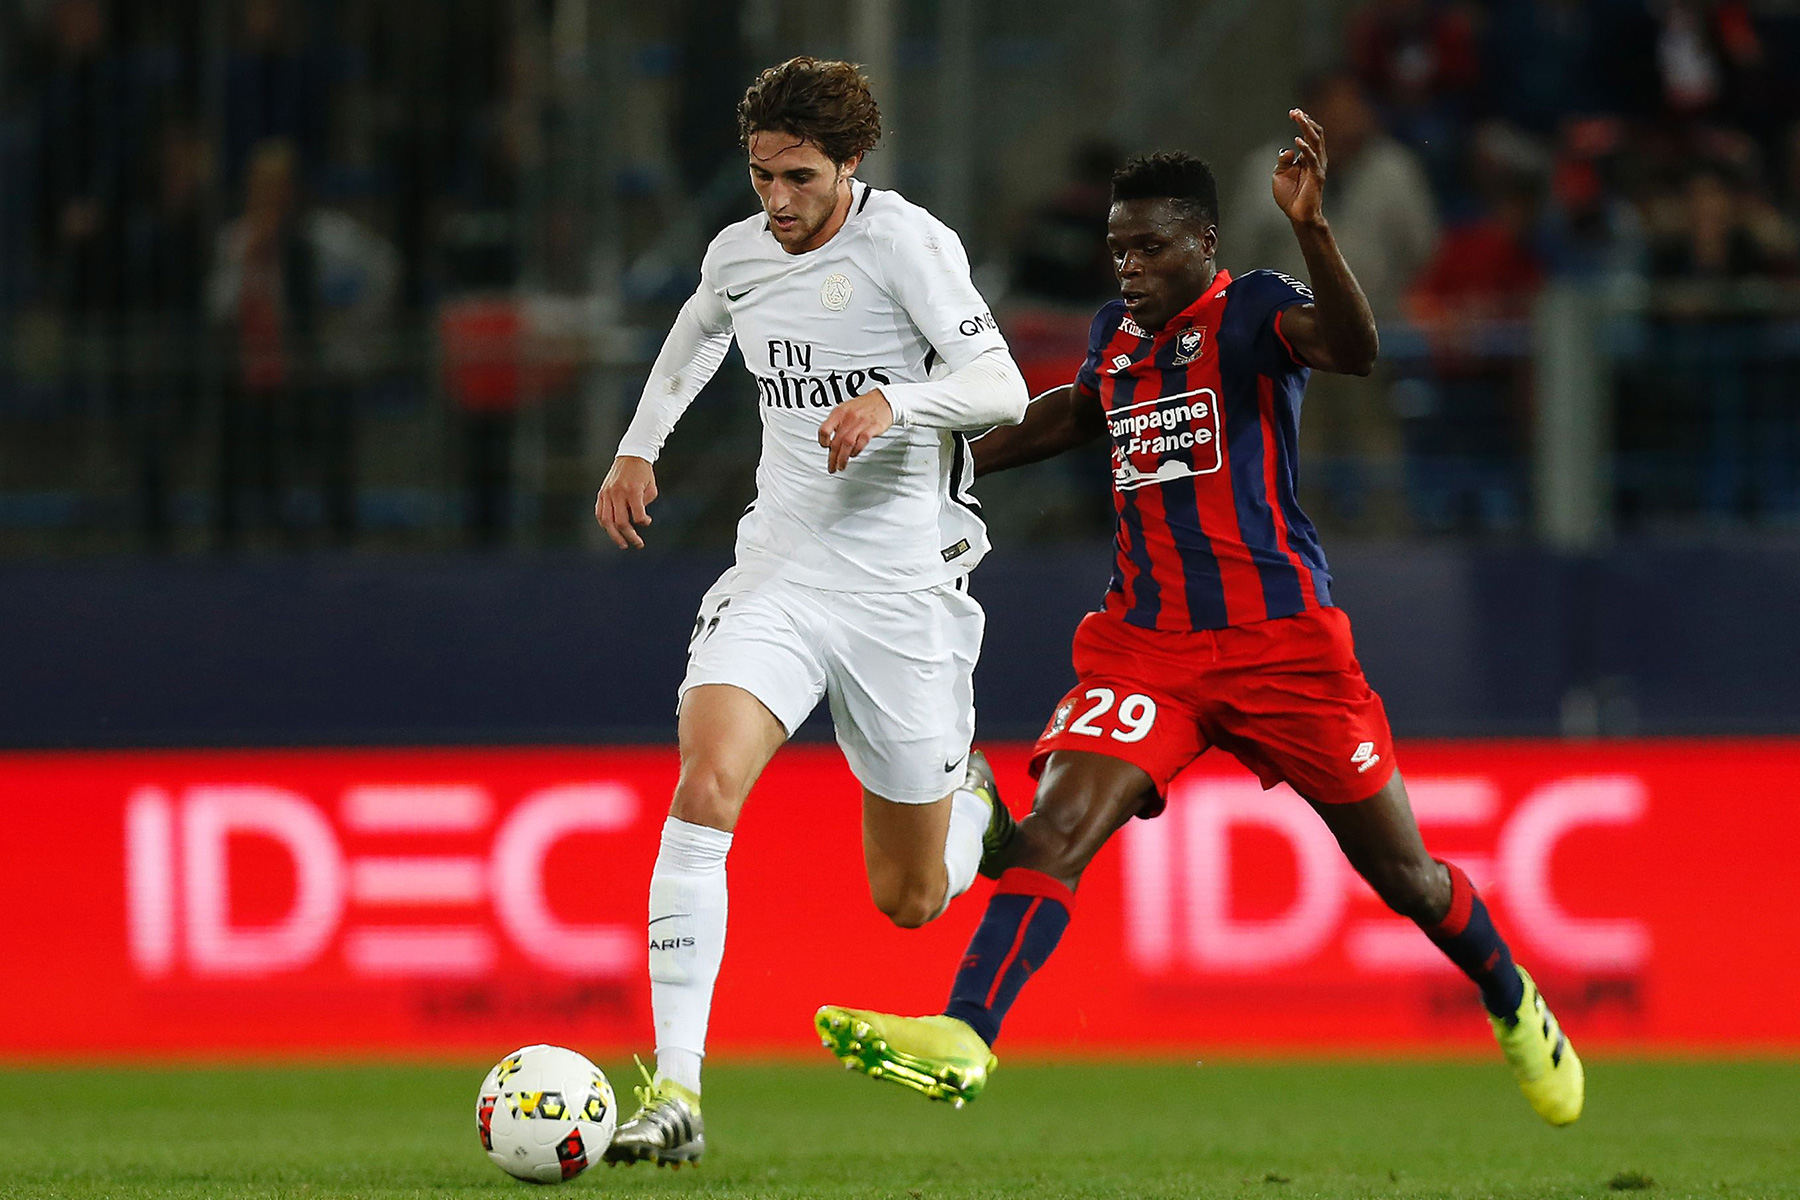 Match Preview PSG Face Caen in Last Ligue 1 Match of the